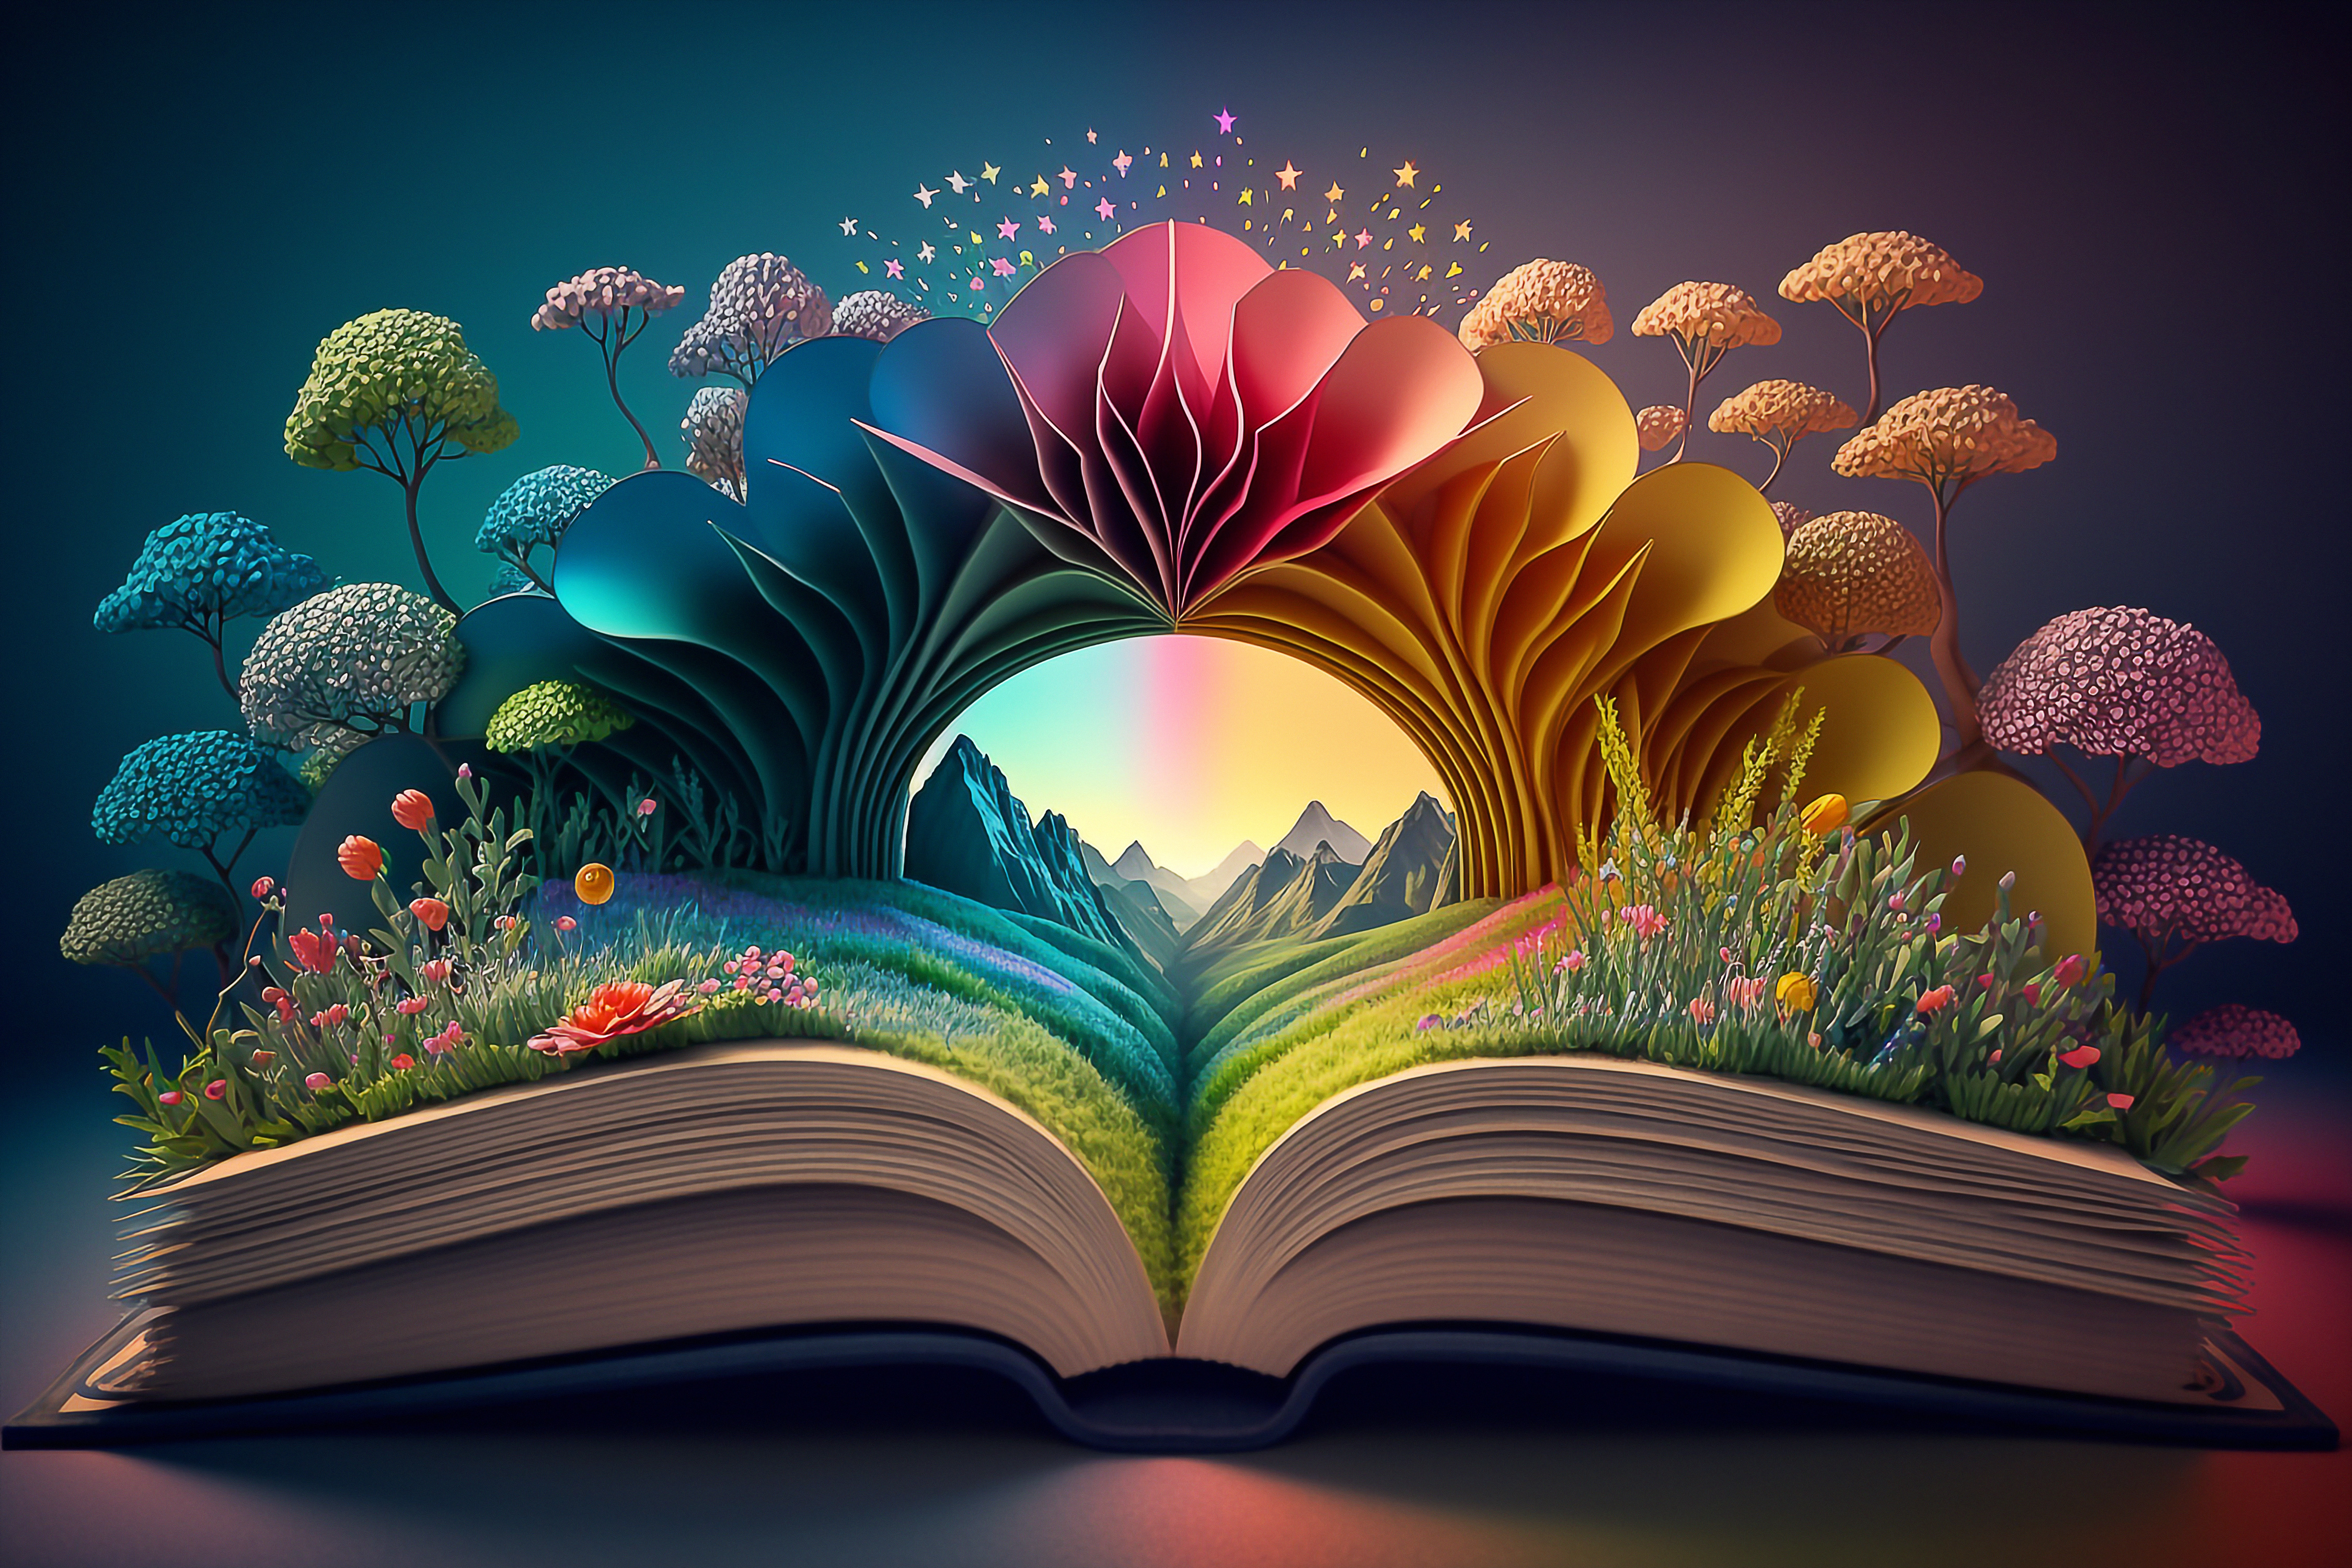 illustration of an open book with flowers and a mountain landscape arising from the pages